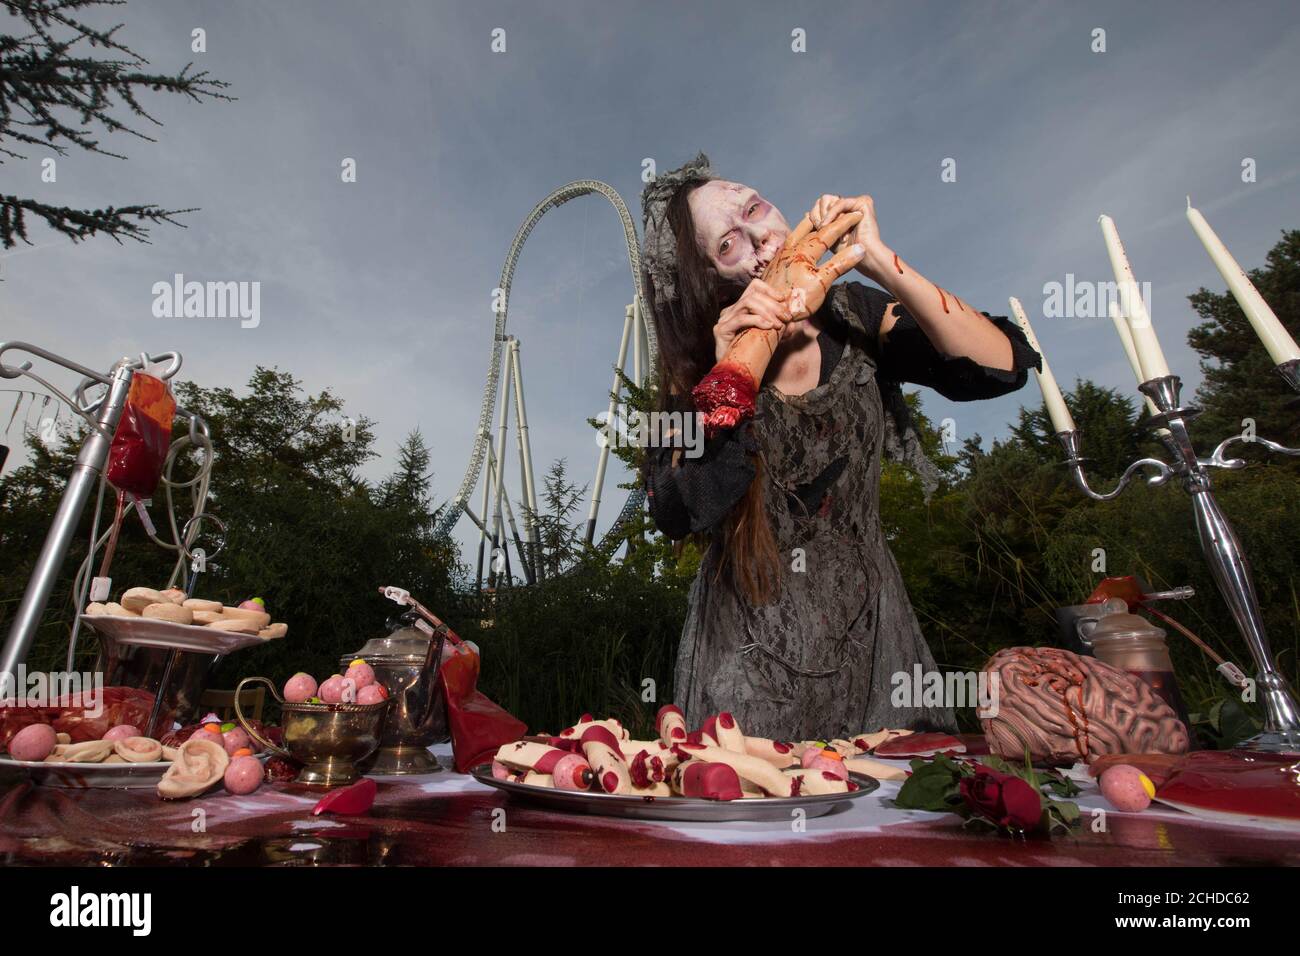 Hollyoaks actress Jennifer Metcalfe dresses as a 'zombie' for a gory feast at THORPE PARK Resort, Chertsey to mark the arrival of six new live action scare mazes and horror zones for this year's FRIGHT NIGHTS season. Stock Photo